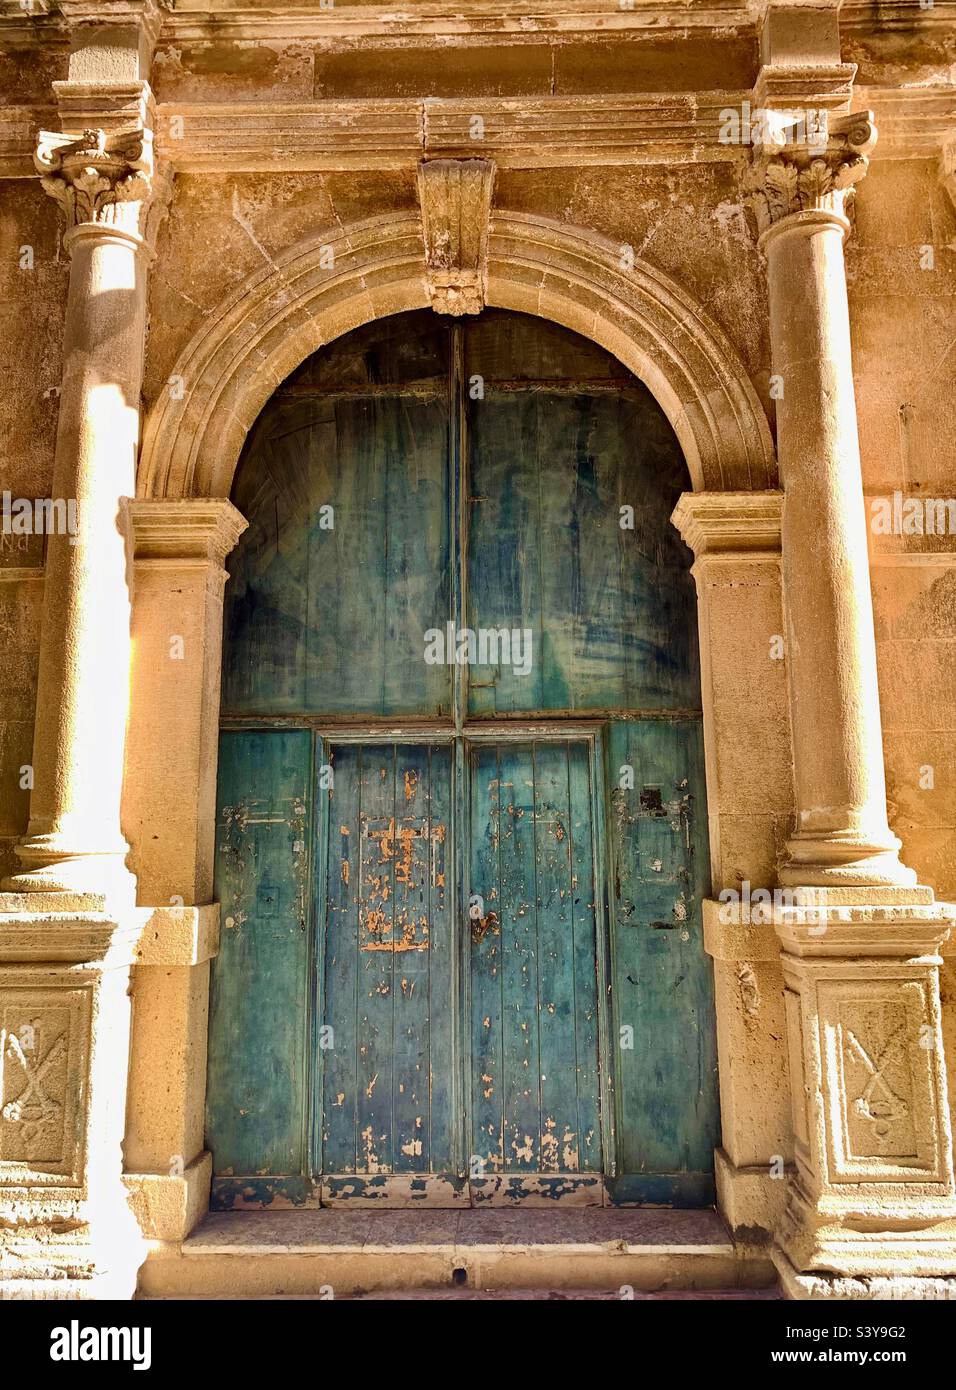 Large stone doorway with old wooden doors in Marsala, Sicily, Italy. Stock Photo